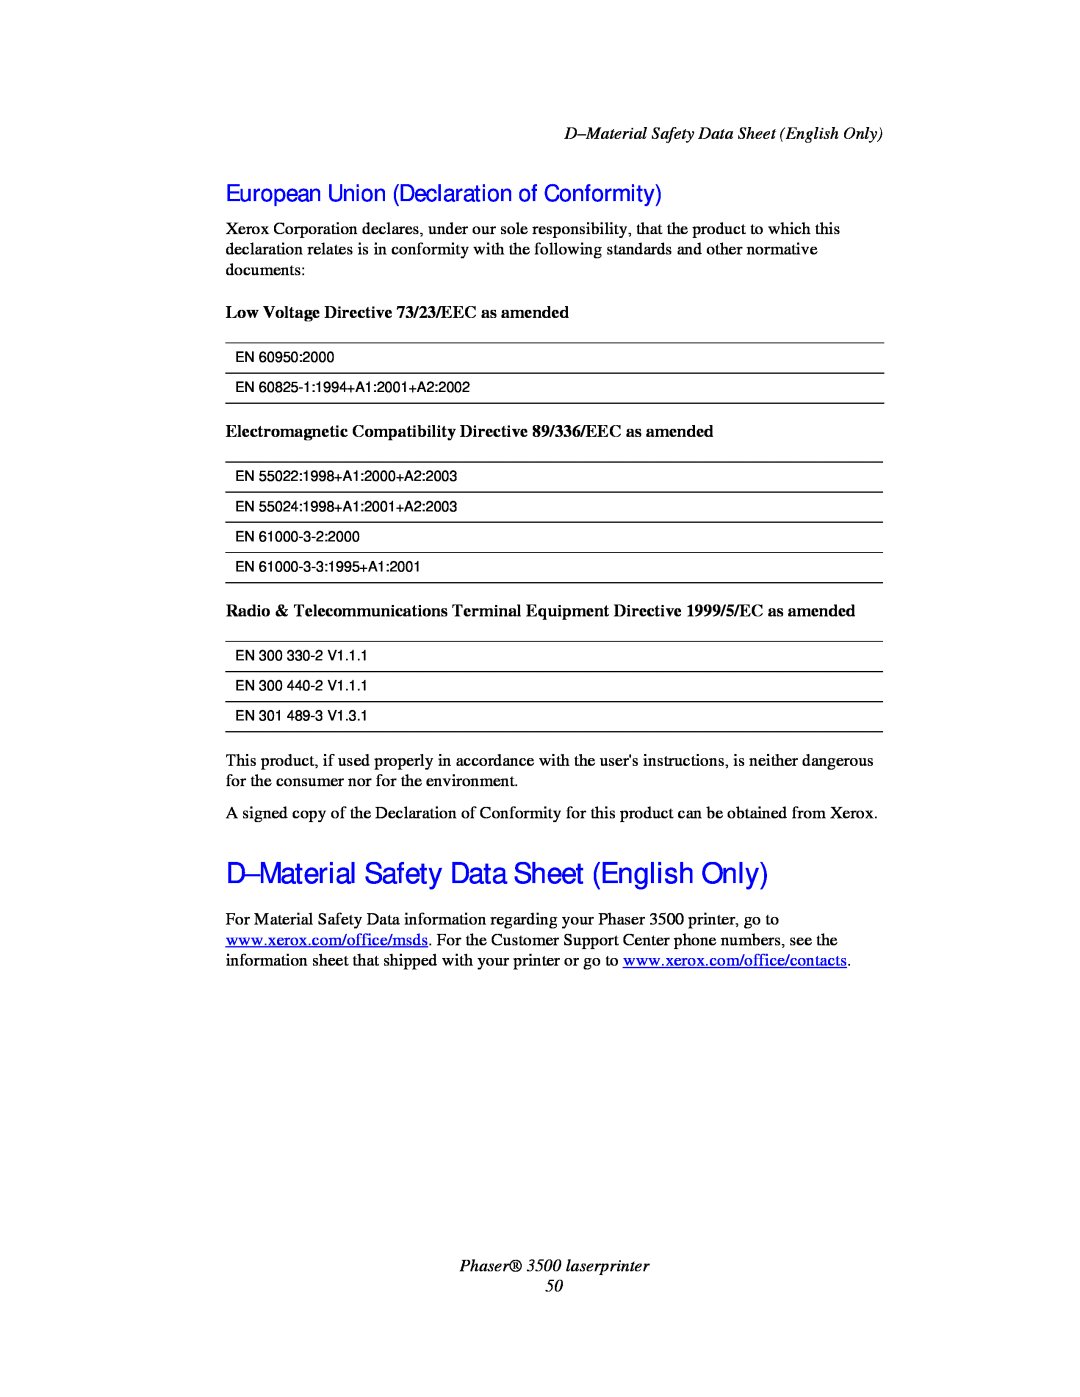 Xerox 3500 manual D-Material Safety Data Sheet English Only, European Union Declaration of Conformity 